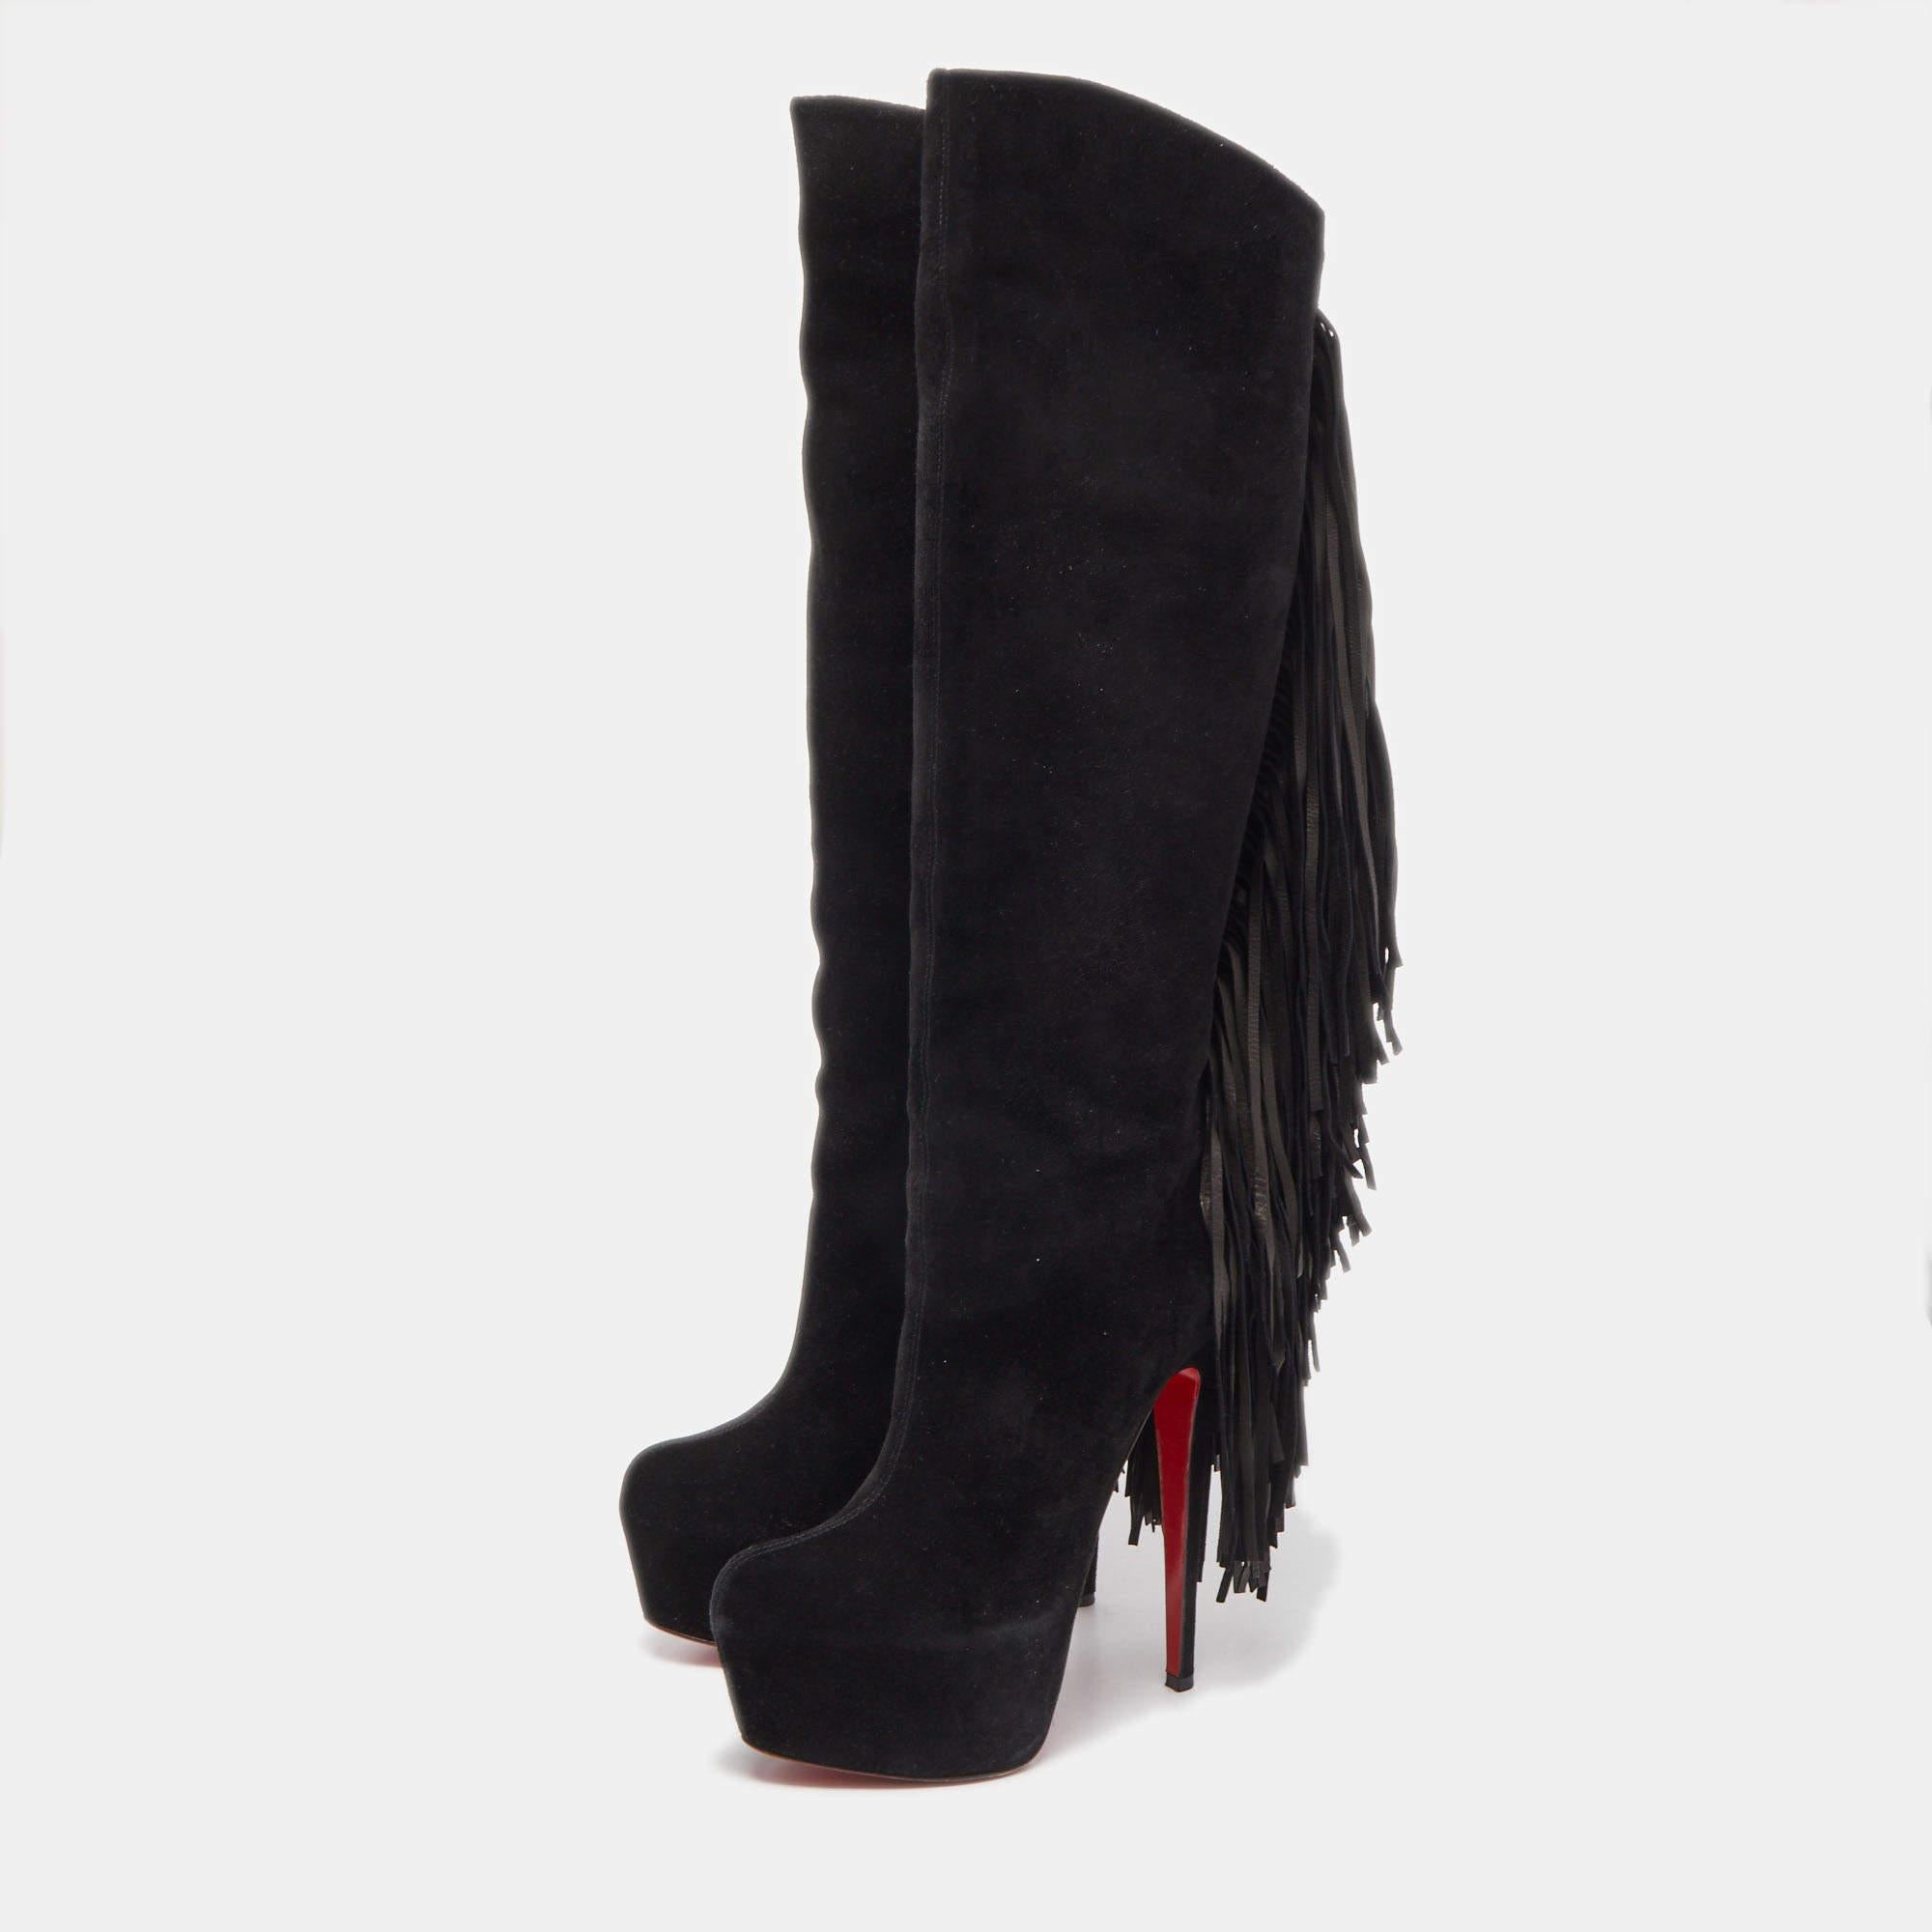 Christian Louboutin Black Suede Interlopa Knee Length Boots Size 39 1